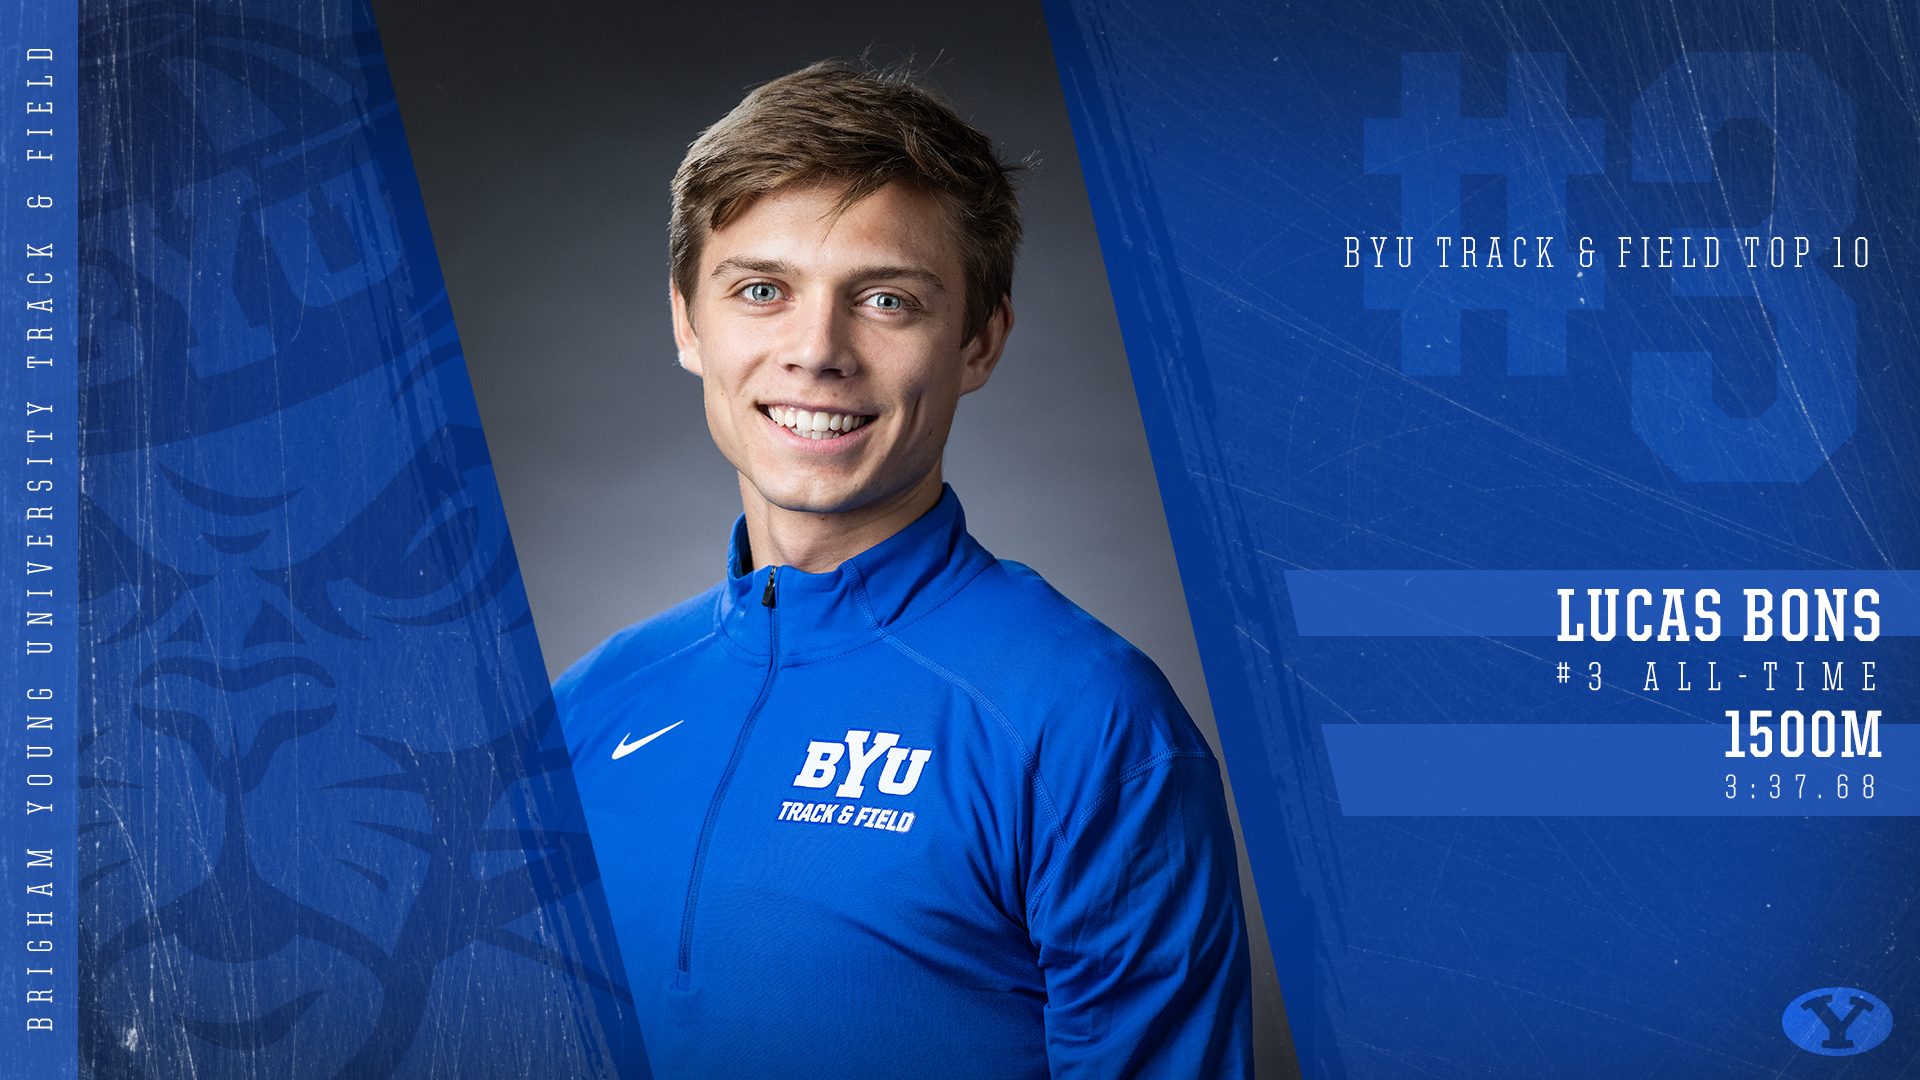 Lucas Bons - BYU Top 10 Graphic